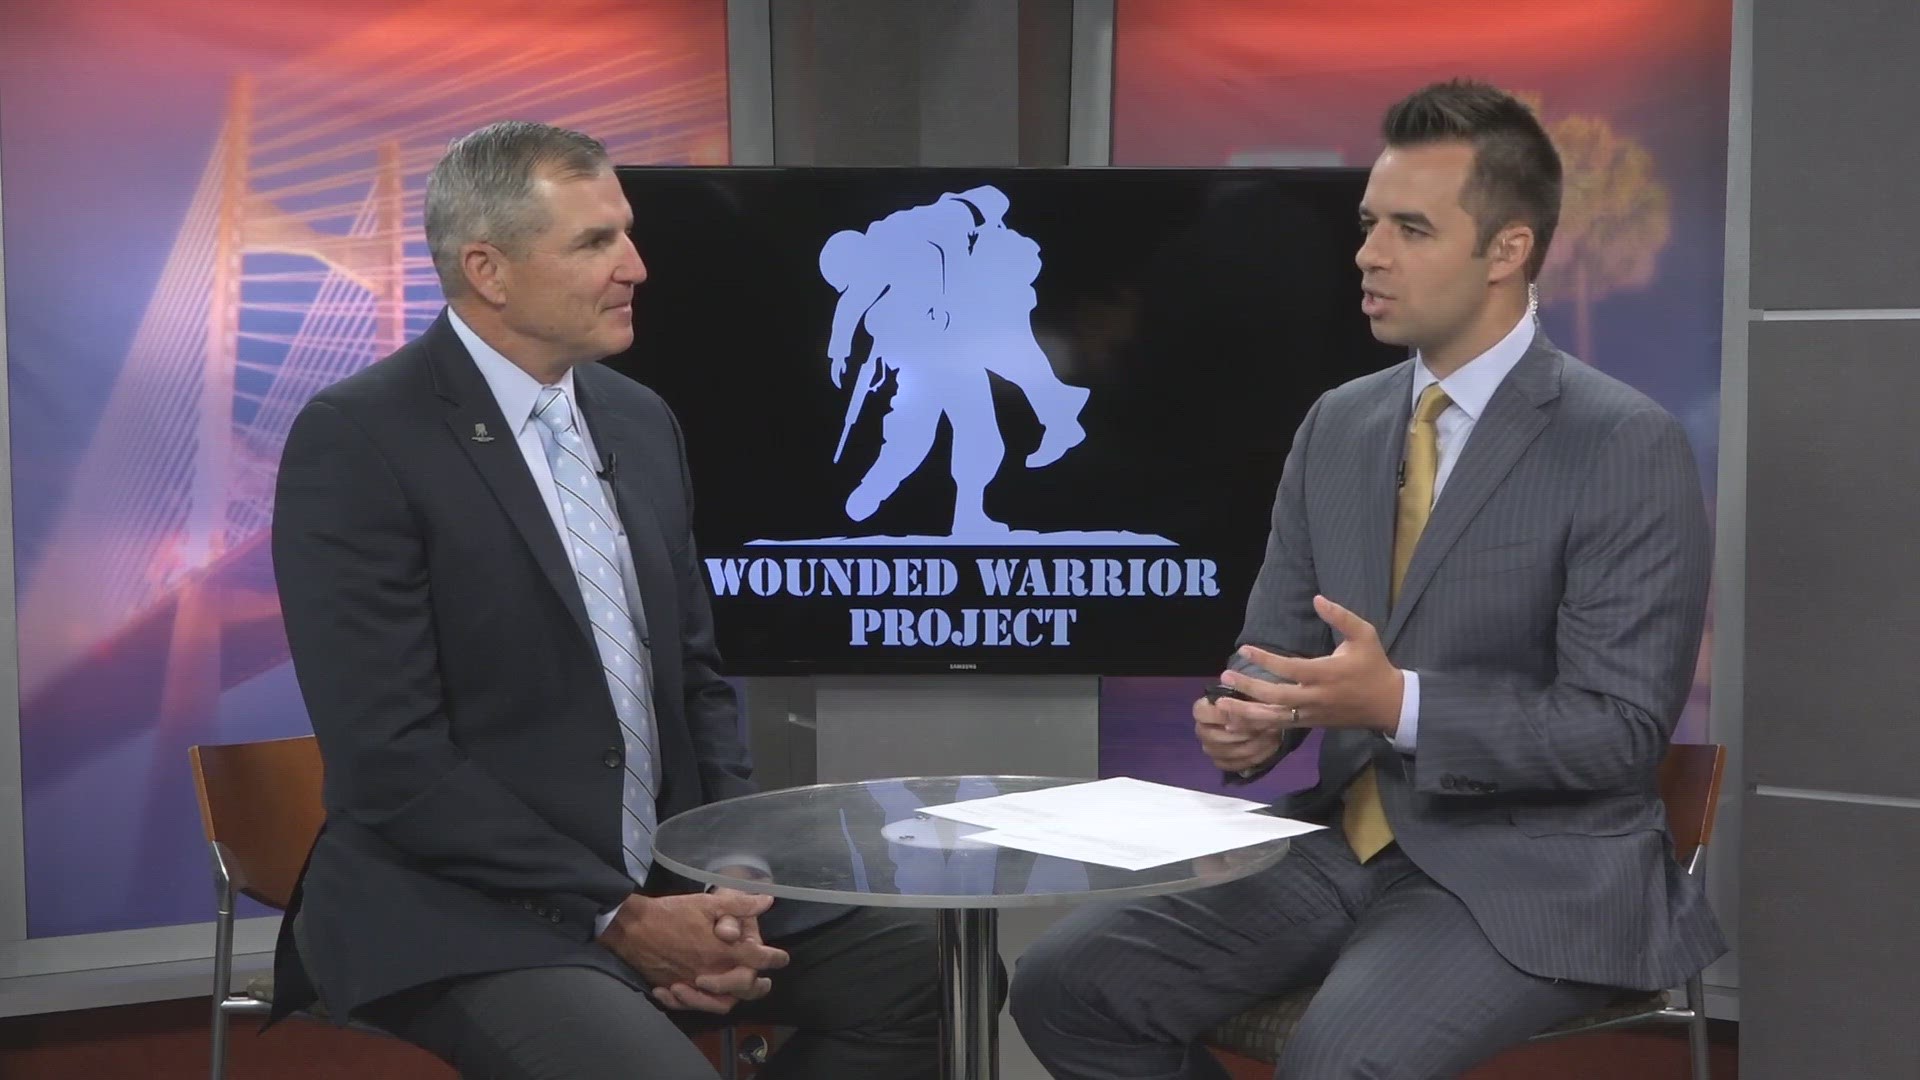 Visit the Wounded Warrior Project website for more information about how you can get involved.